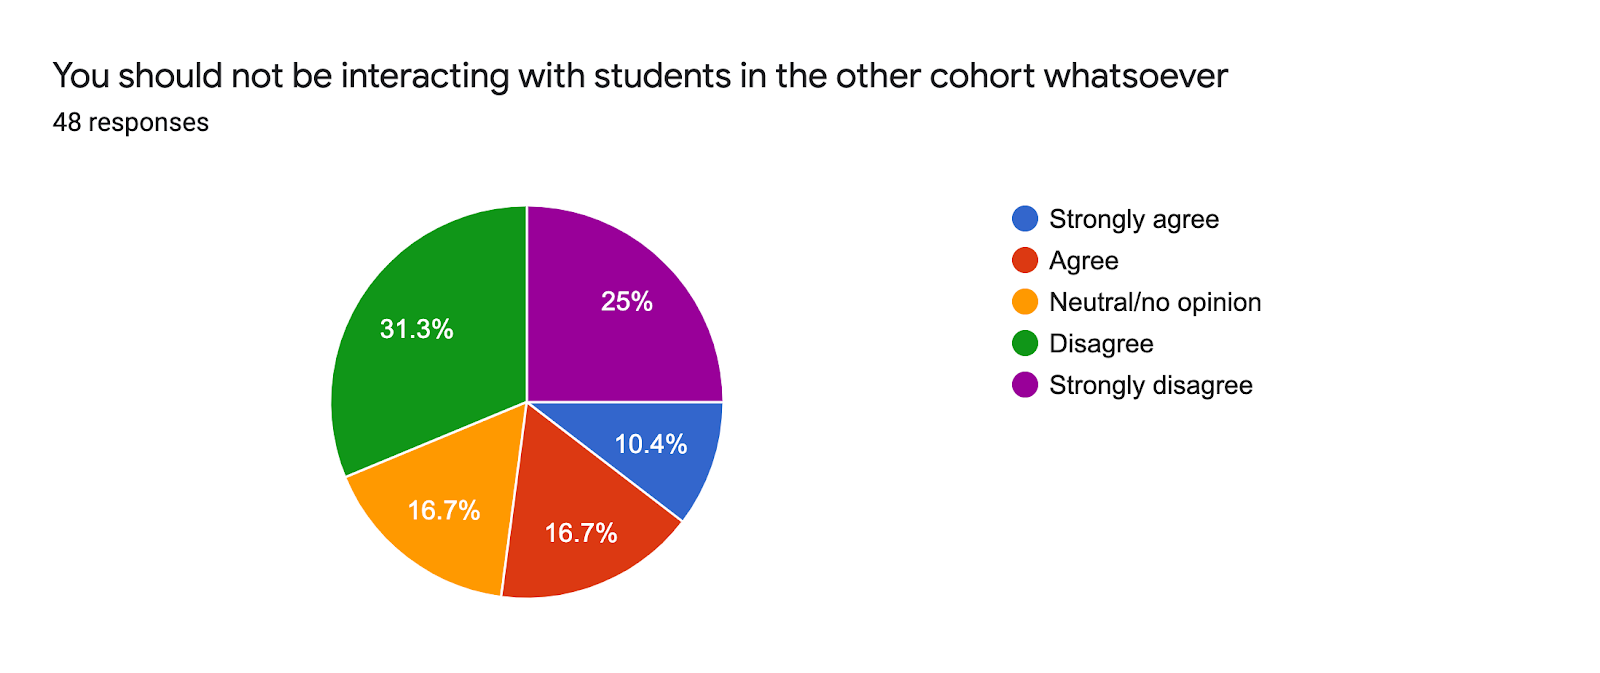 Forms response chart. Question title: You should not be interacting with students in the other cohort whatsoever. Number of responses: 48 responses.